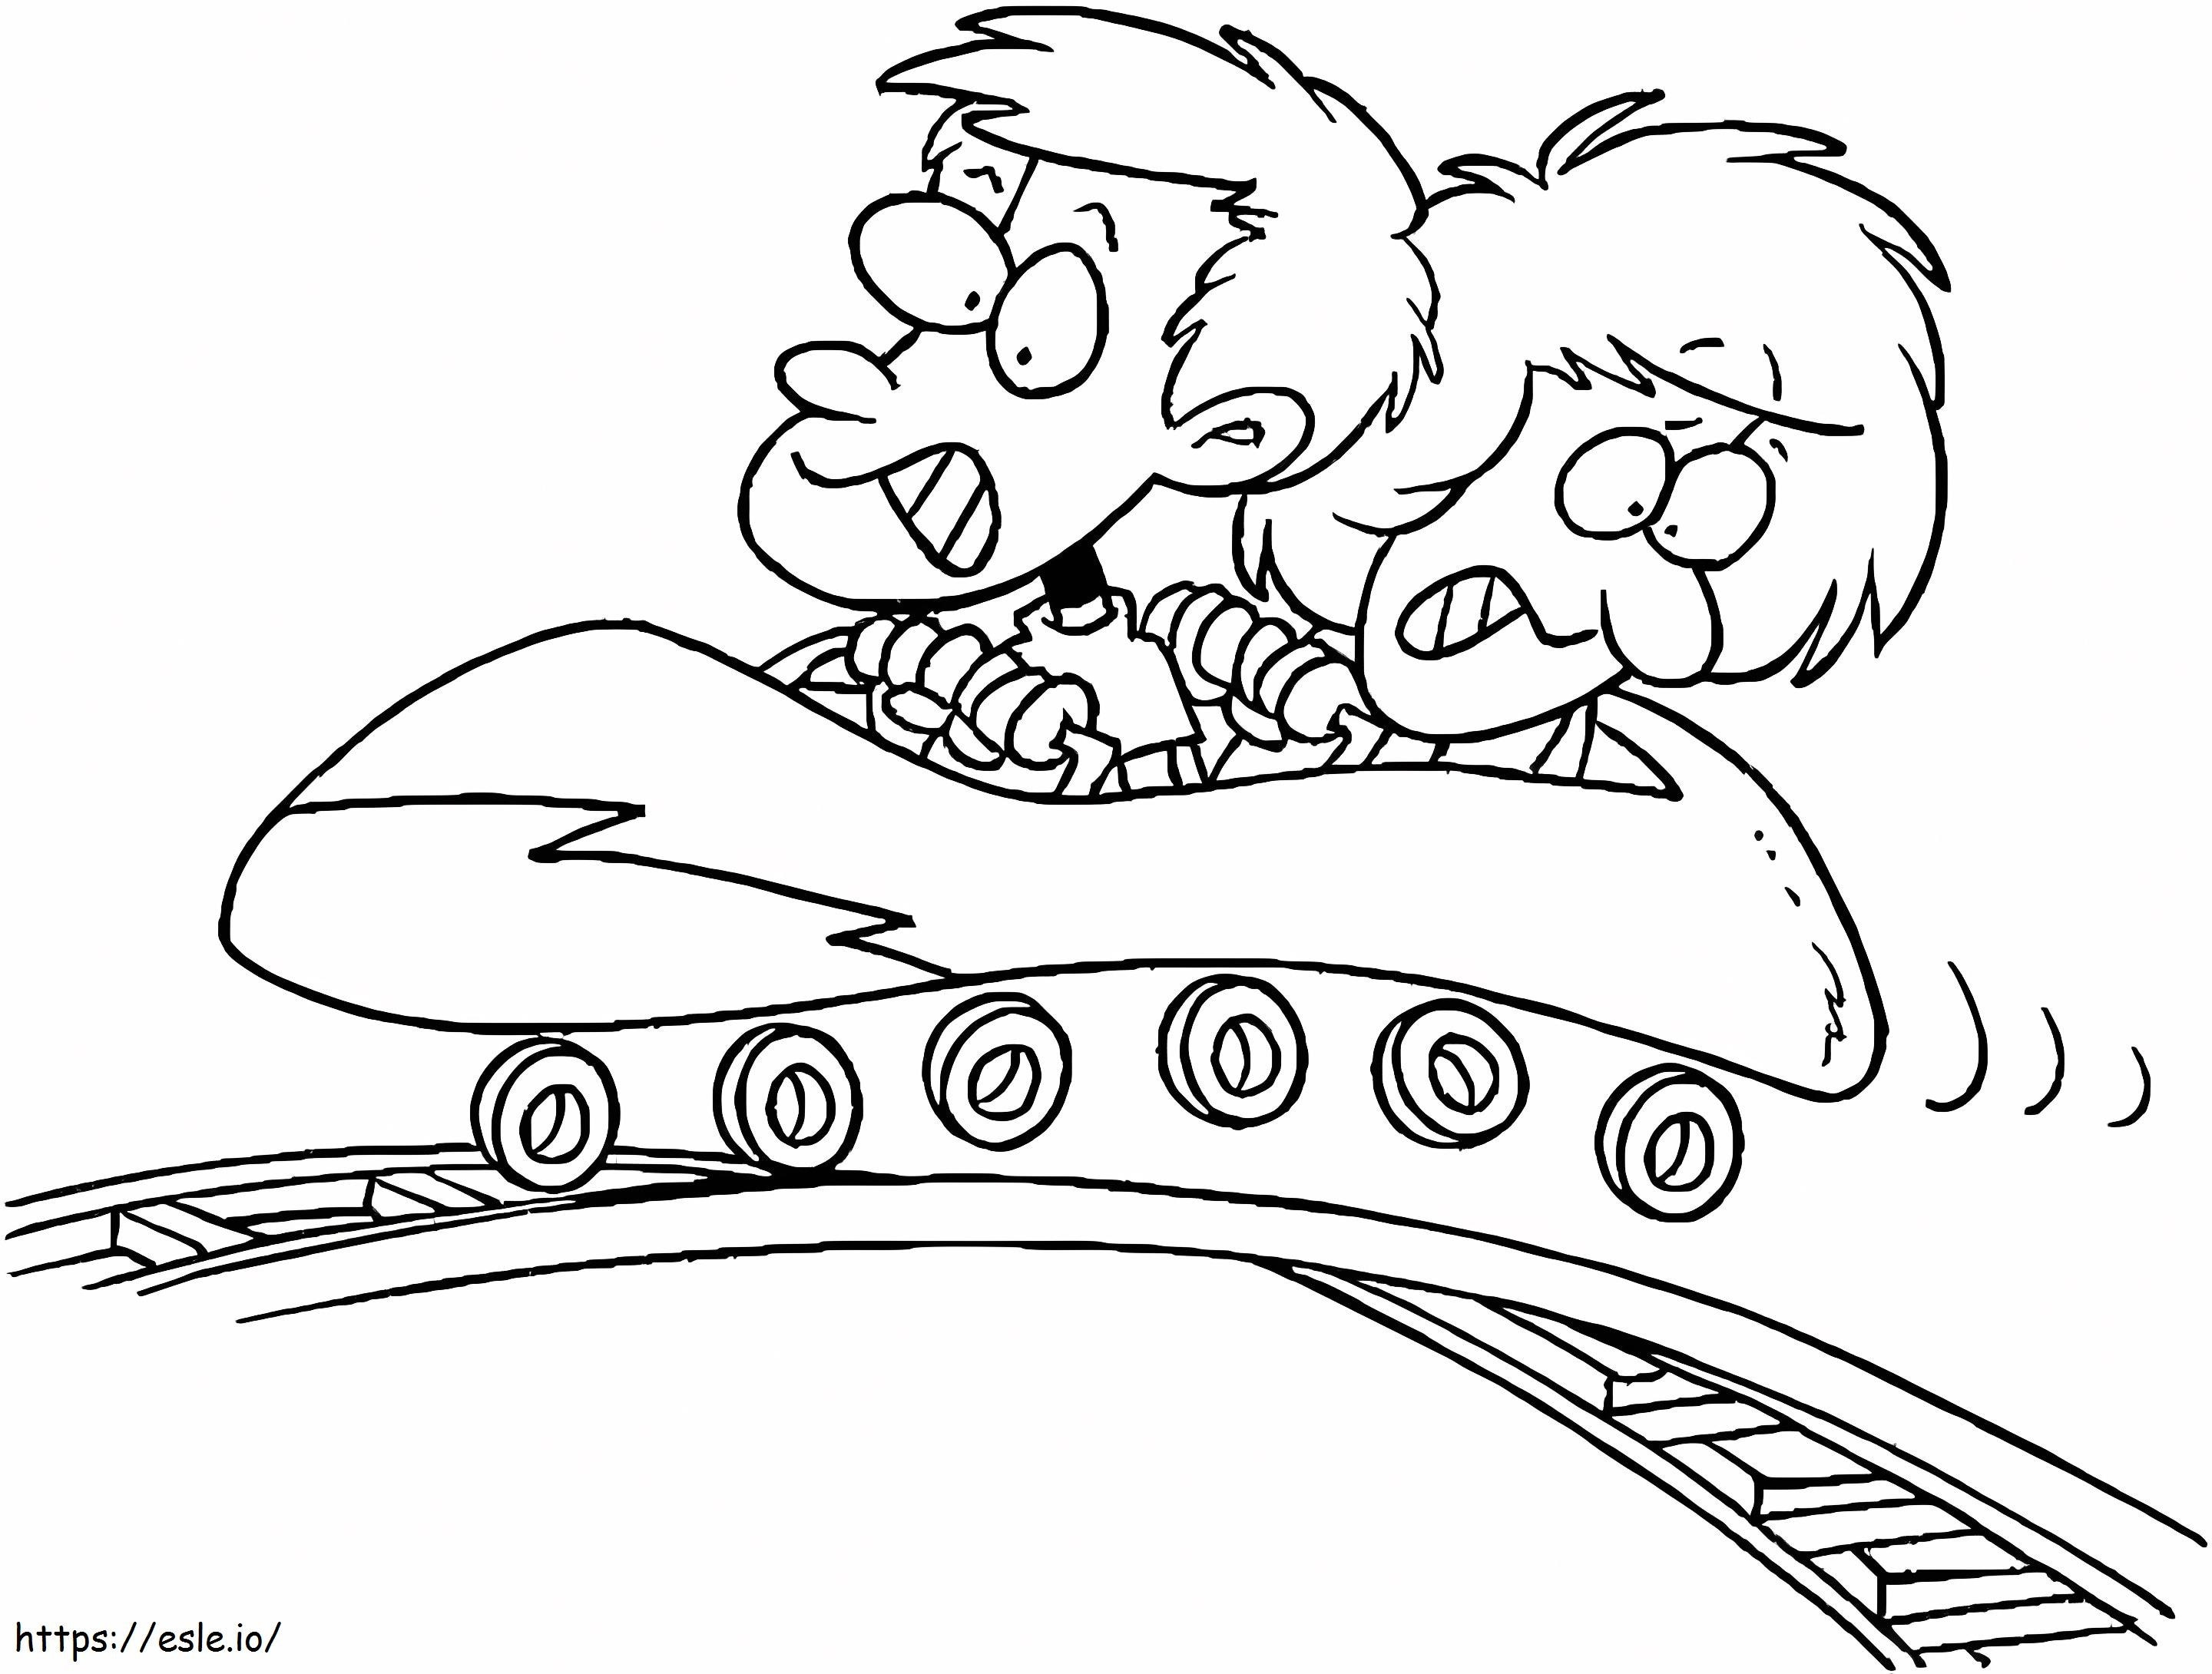 Free Roller Coaster To Print coloring page